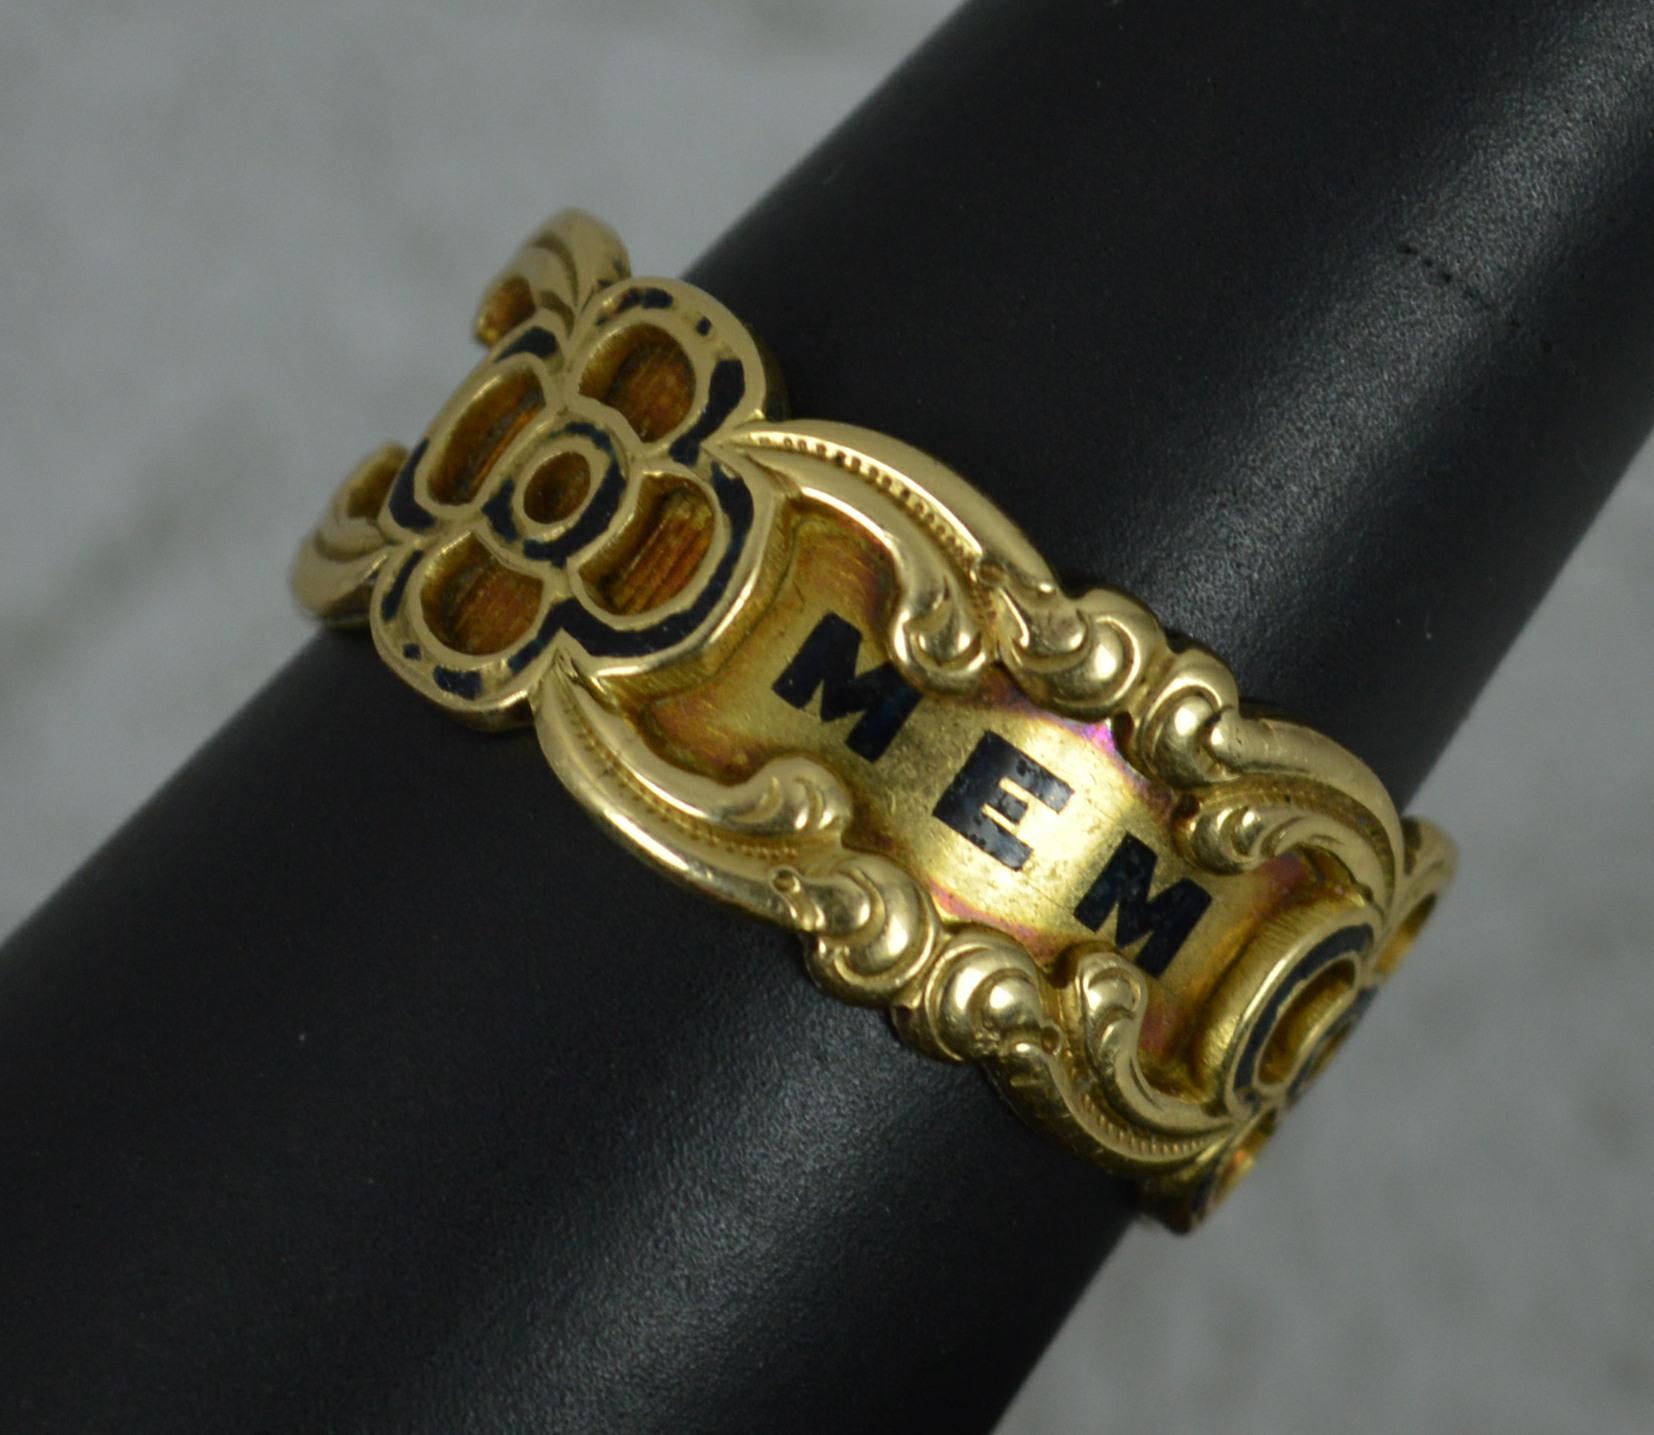 1842 Victorian 18 Carat Gold Enamel In Memory of Mourning Band Ring For Sale 7